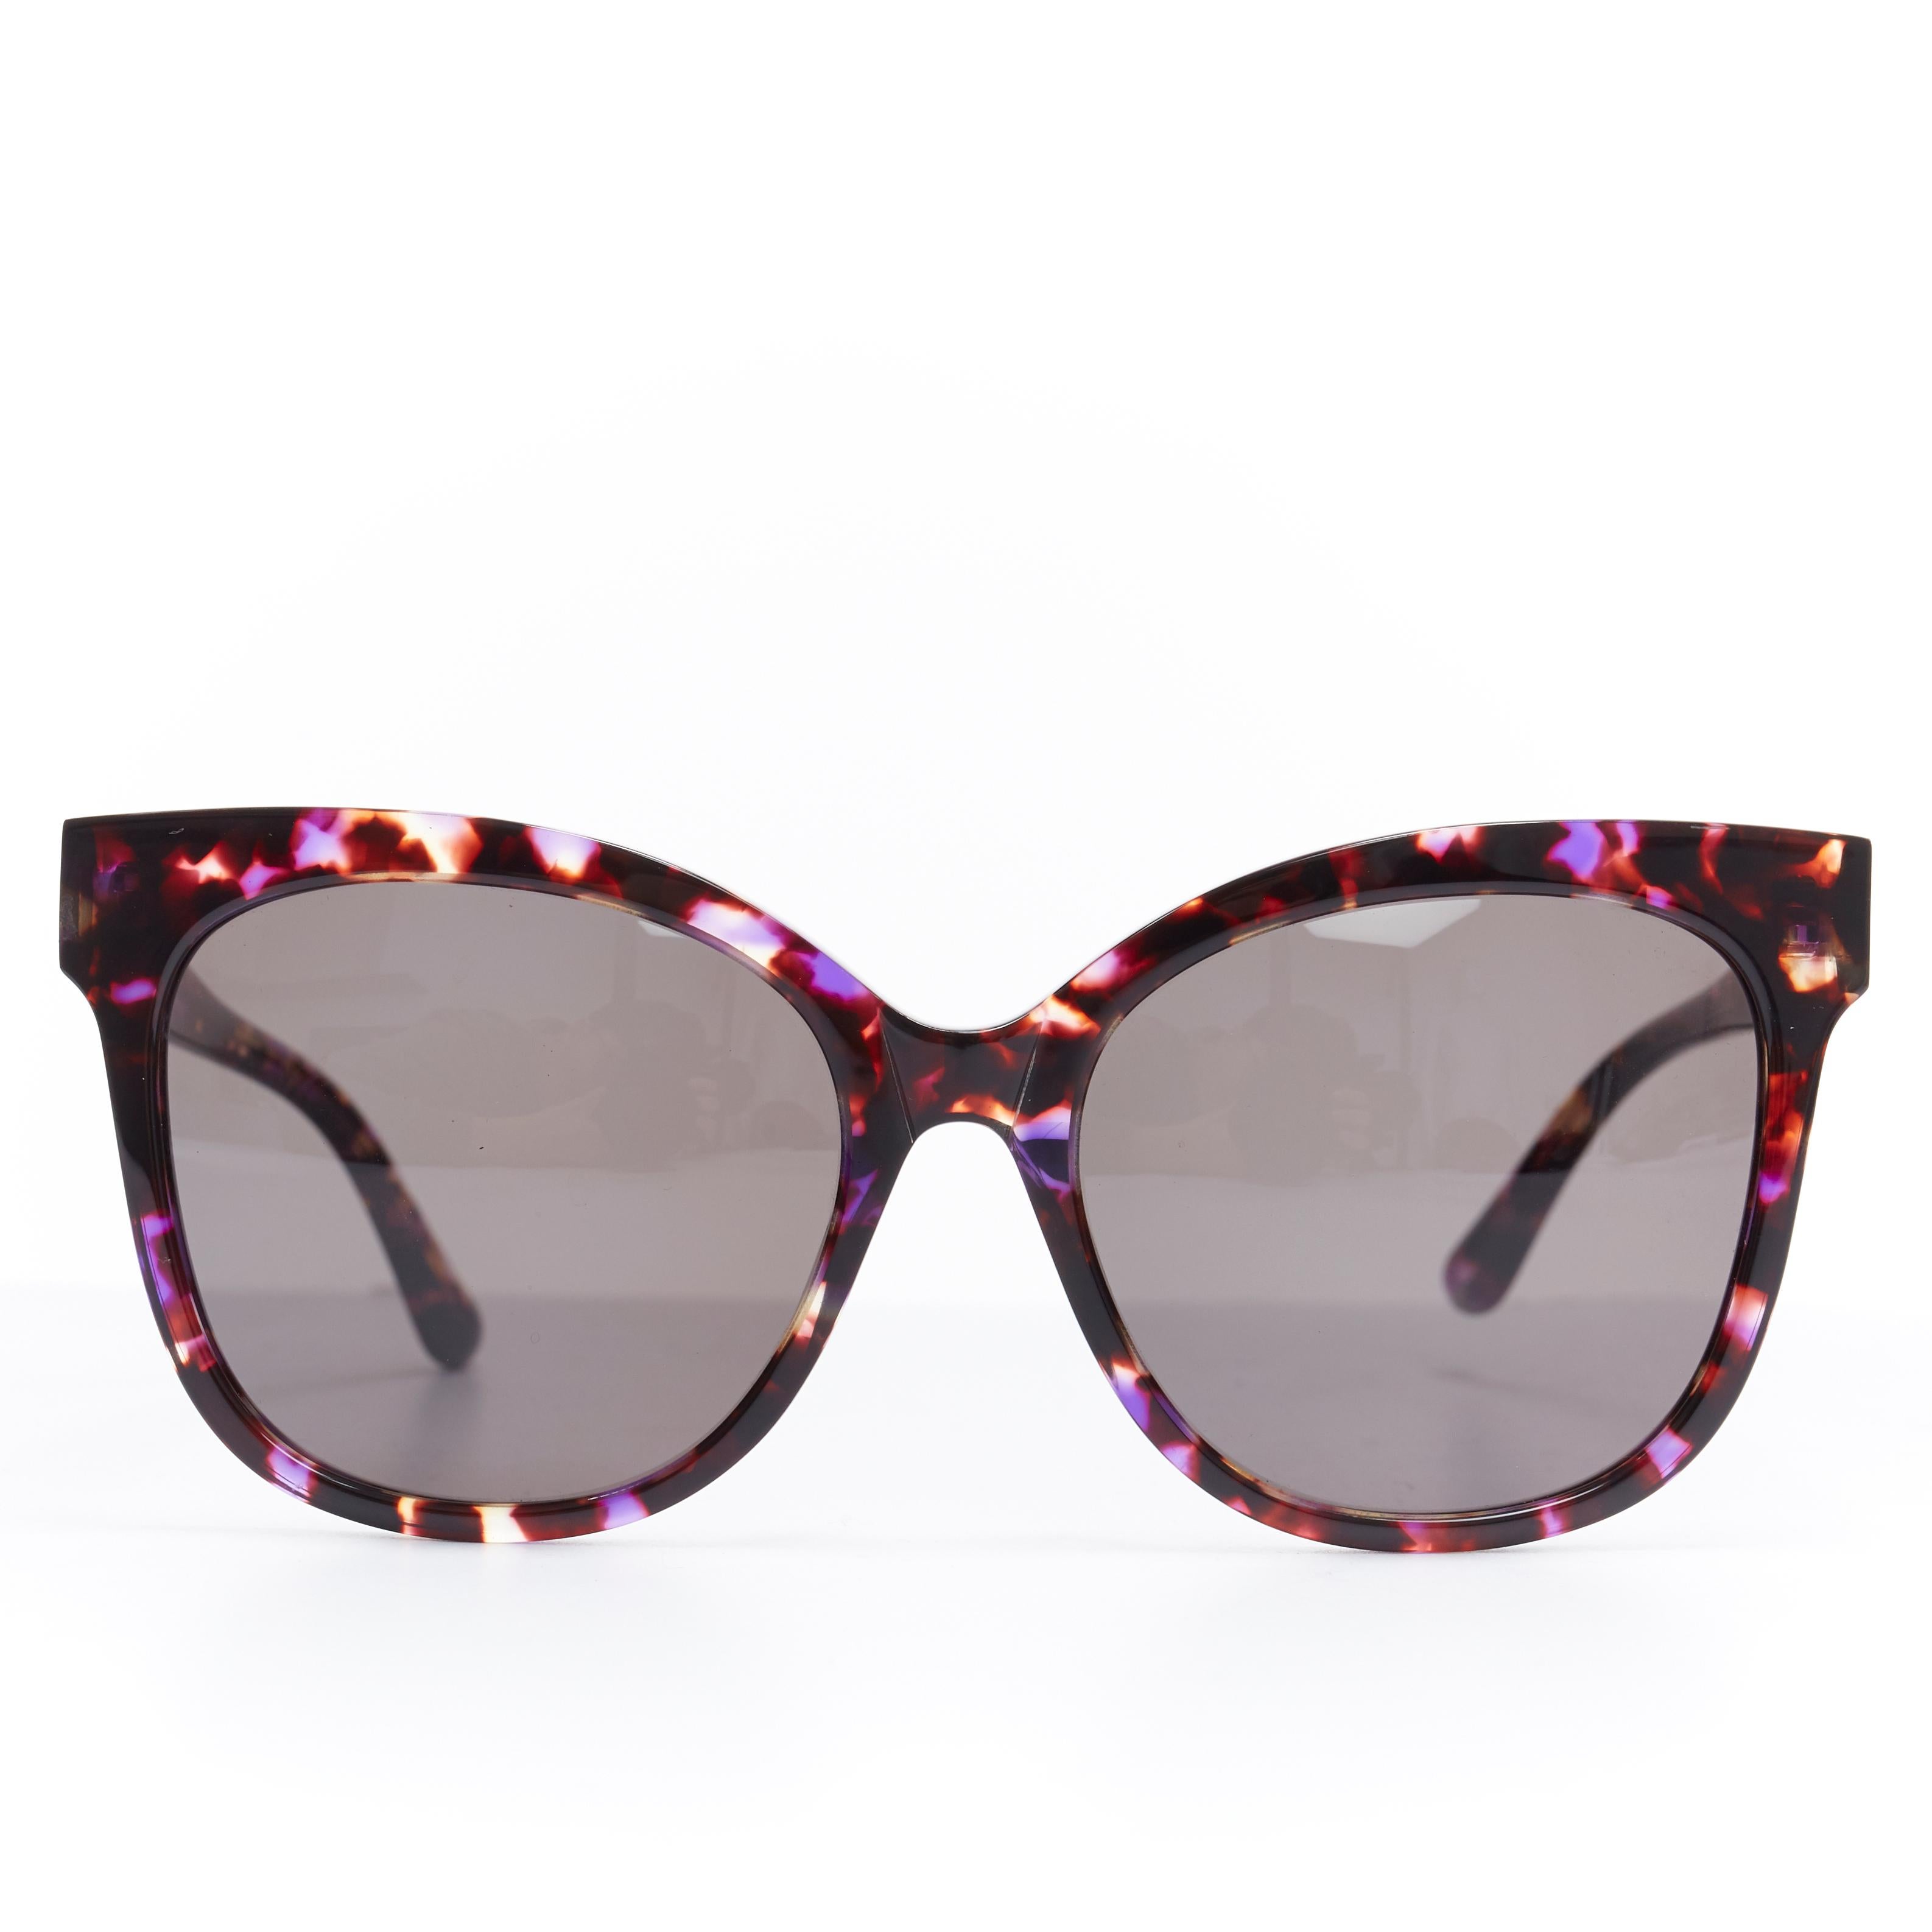 GENTLE MONSTER La Rouge purple tortoise resin black lens cat eye sunglasses Reference: WEYN/A00348 
Brand: Gentle Monster 
Material: Plastic 
Color: Purple 
Pattern: Solid 
Made in: China 

CONDITION: 
Condition: Very good, this item was pre-owned